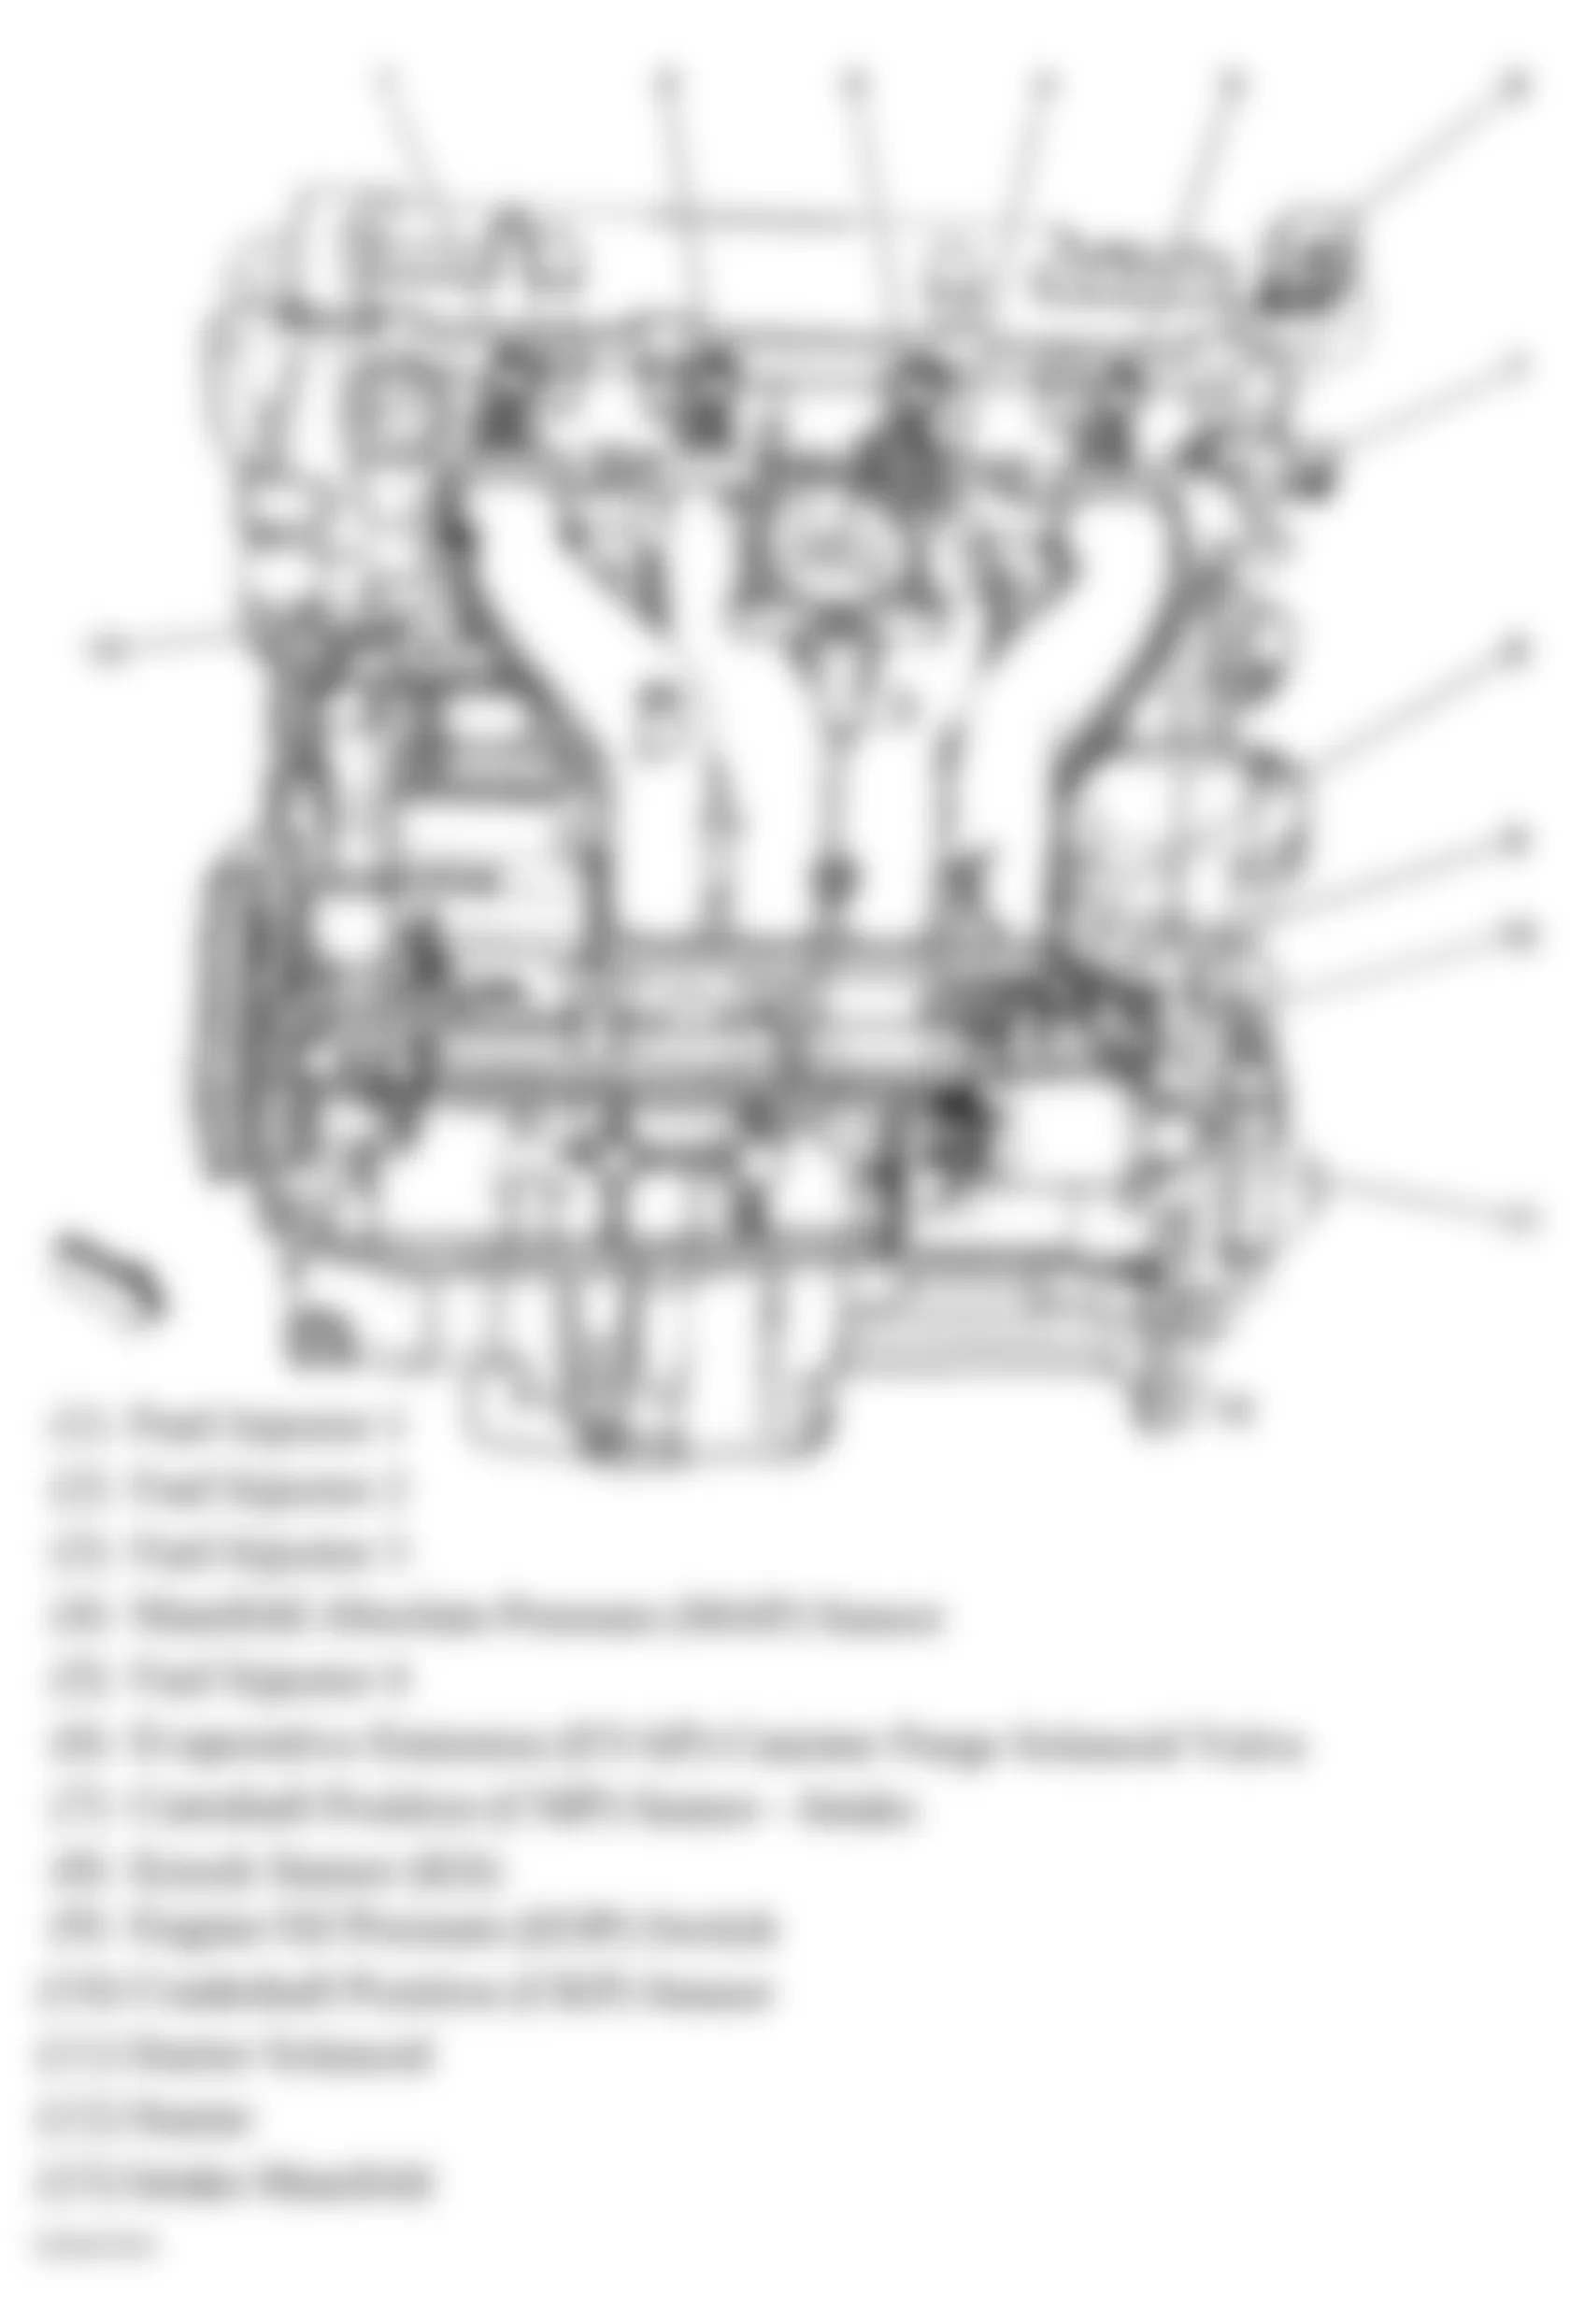 Chevrolet HHR LS 2007 - Component Locations -  Left Side Of Engine (2.4L)